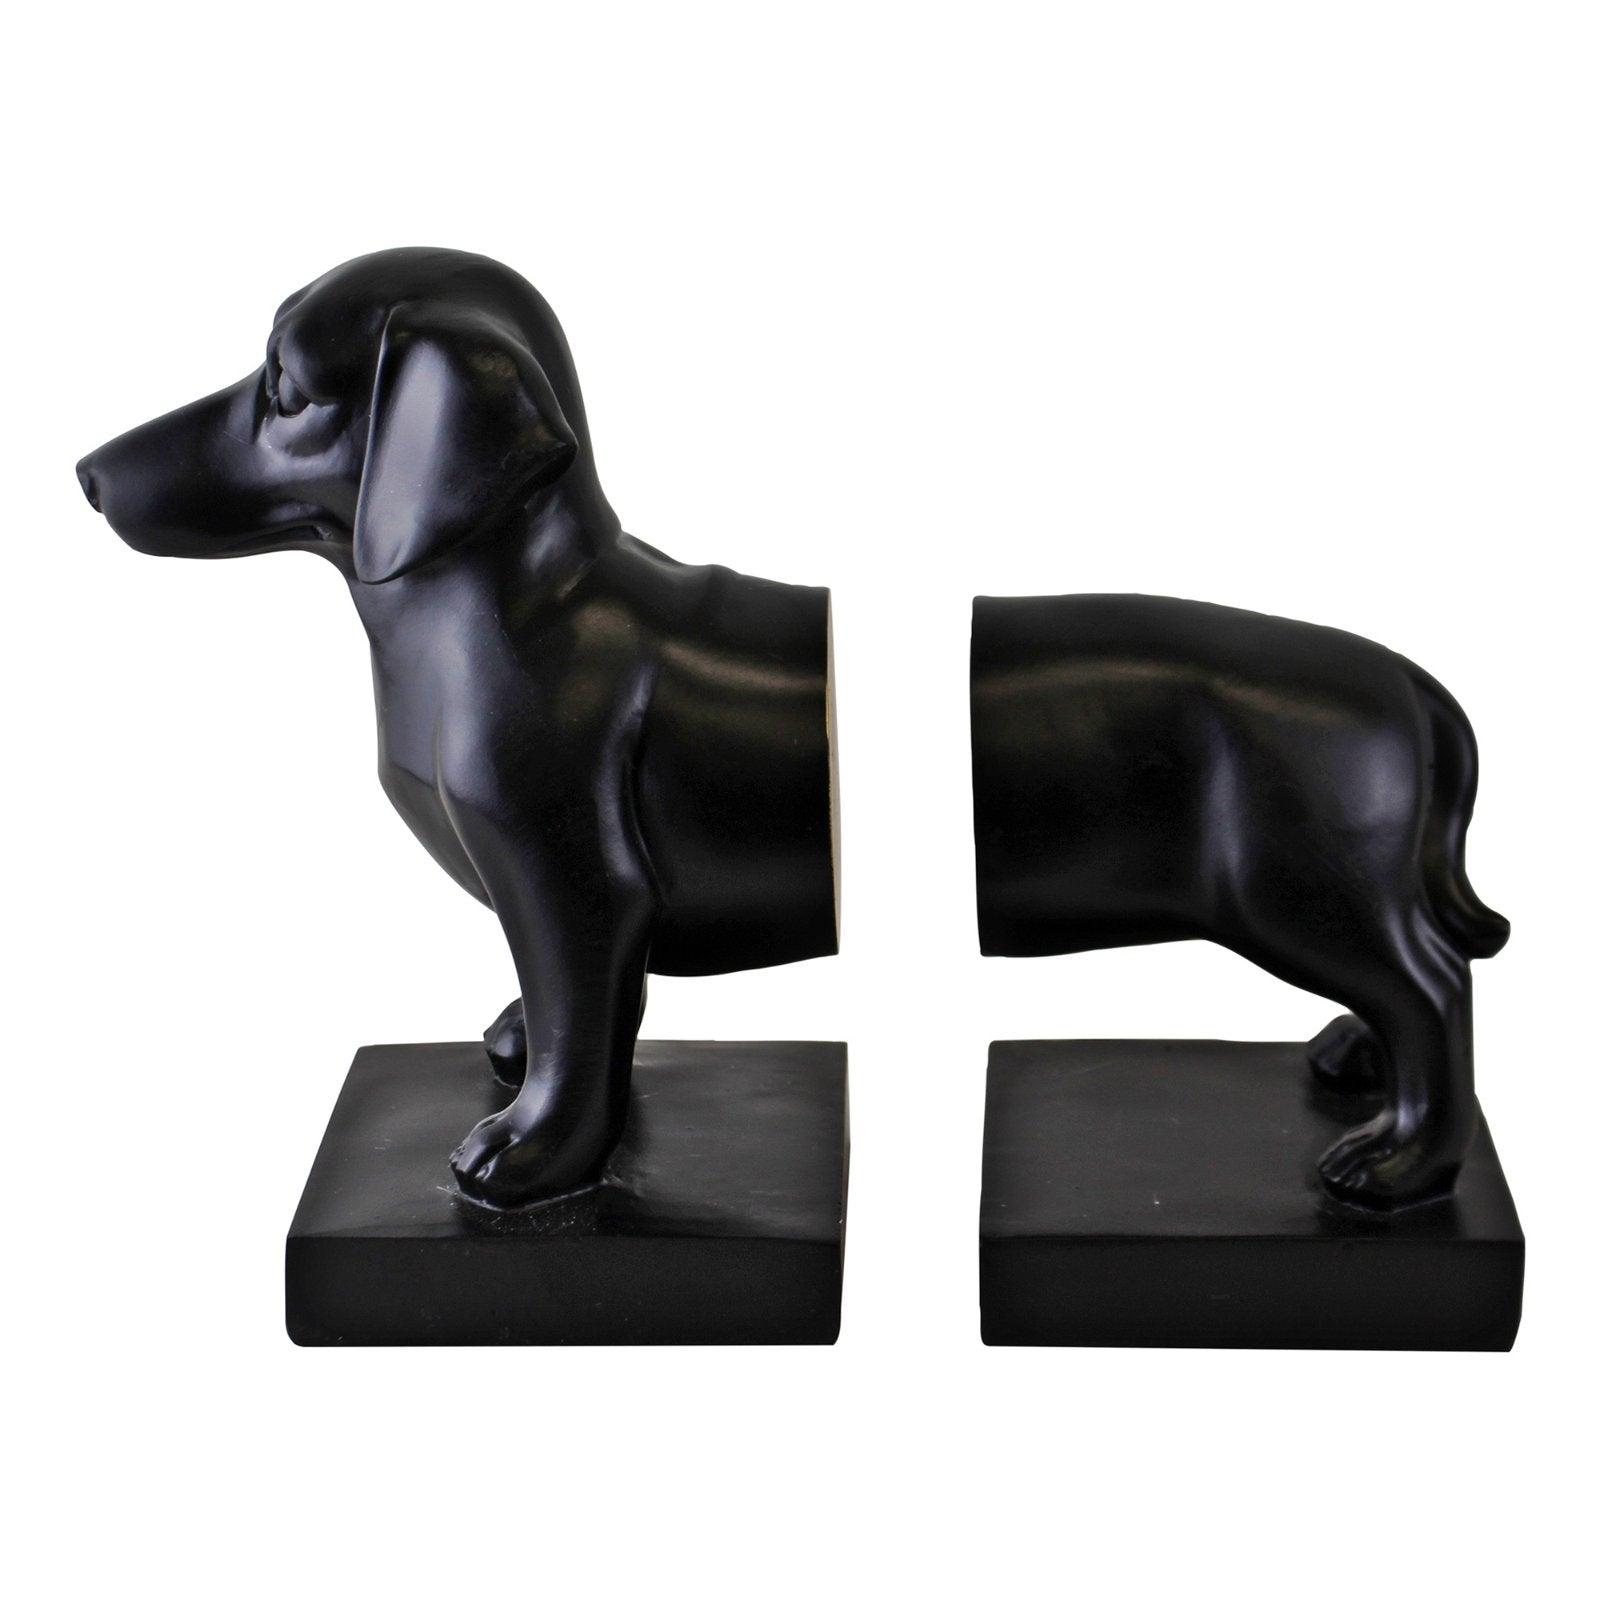 Sausage Dog Bookends, Black Finish-Bookends